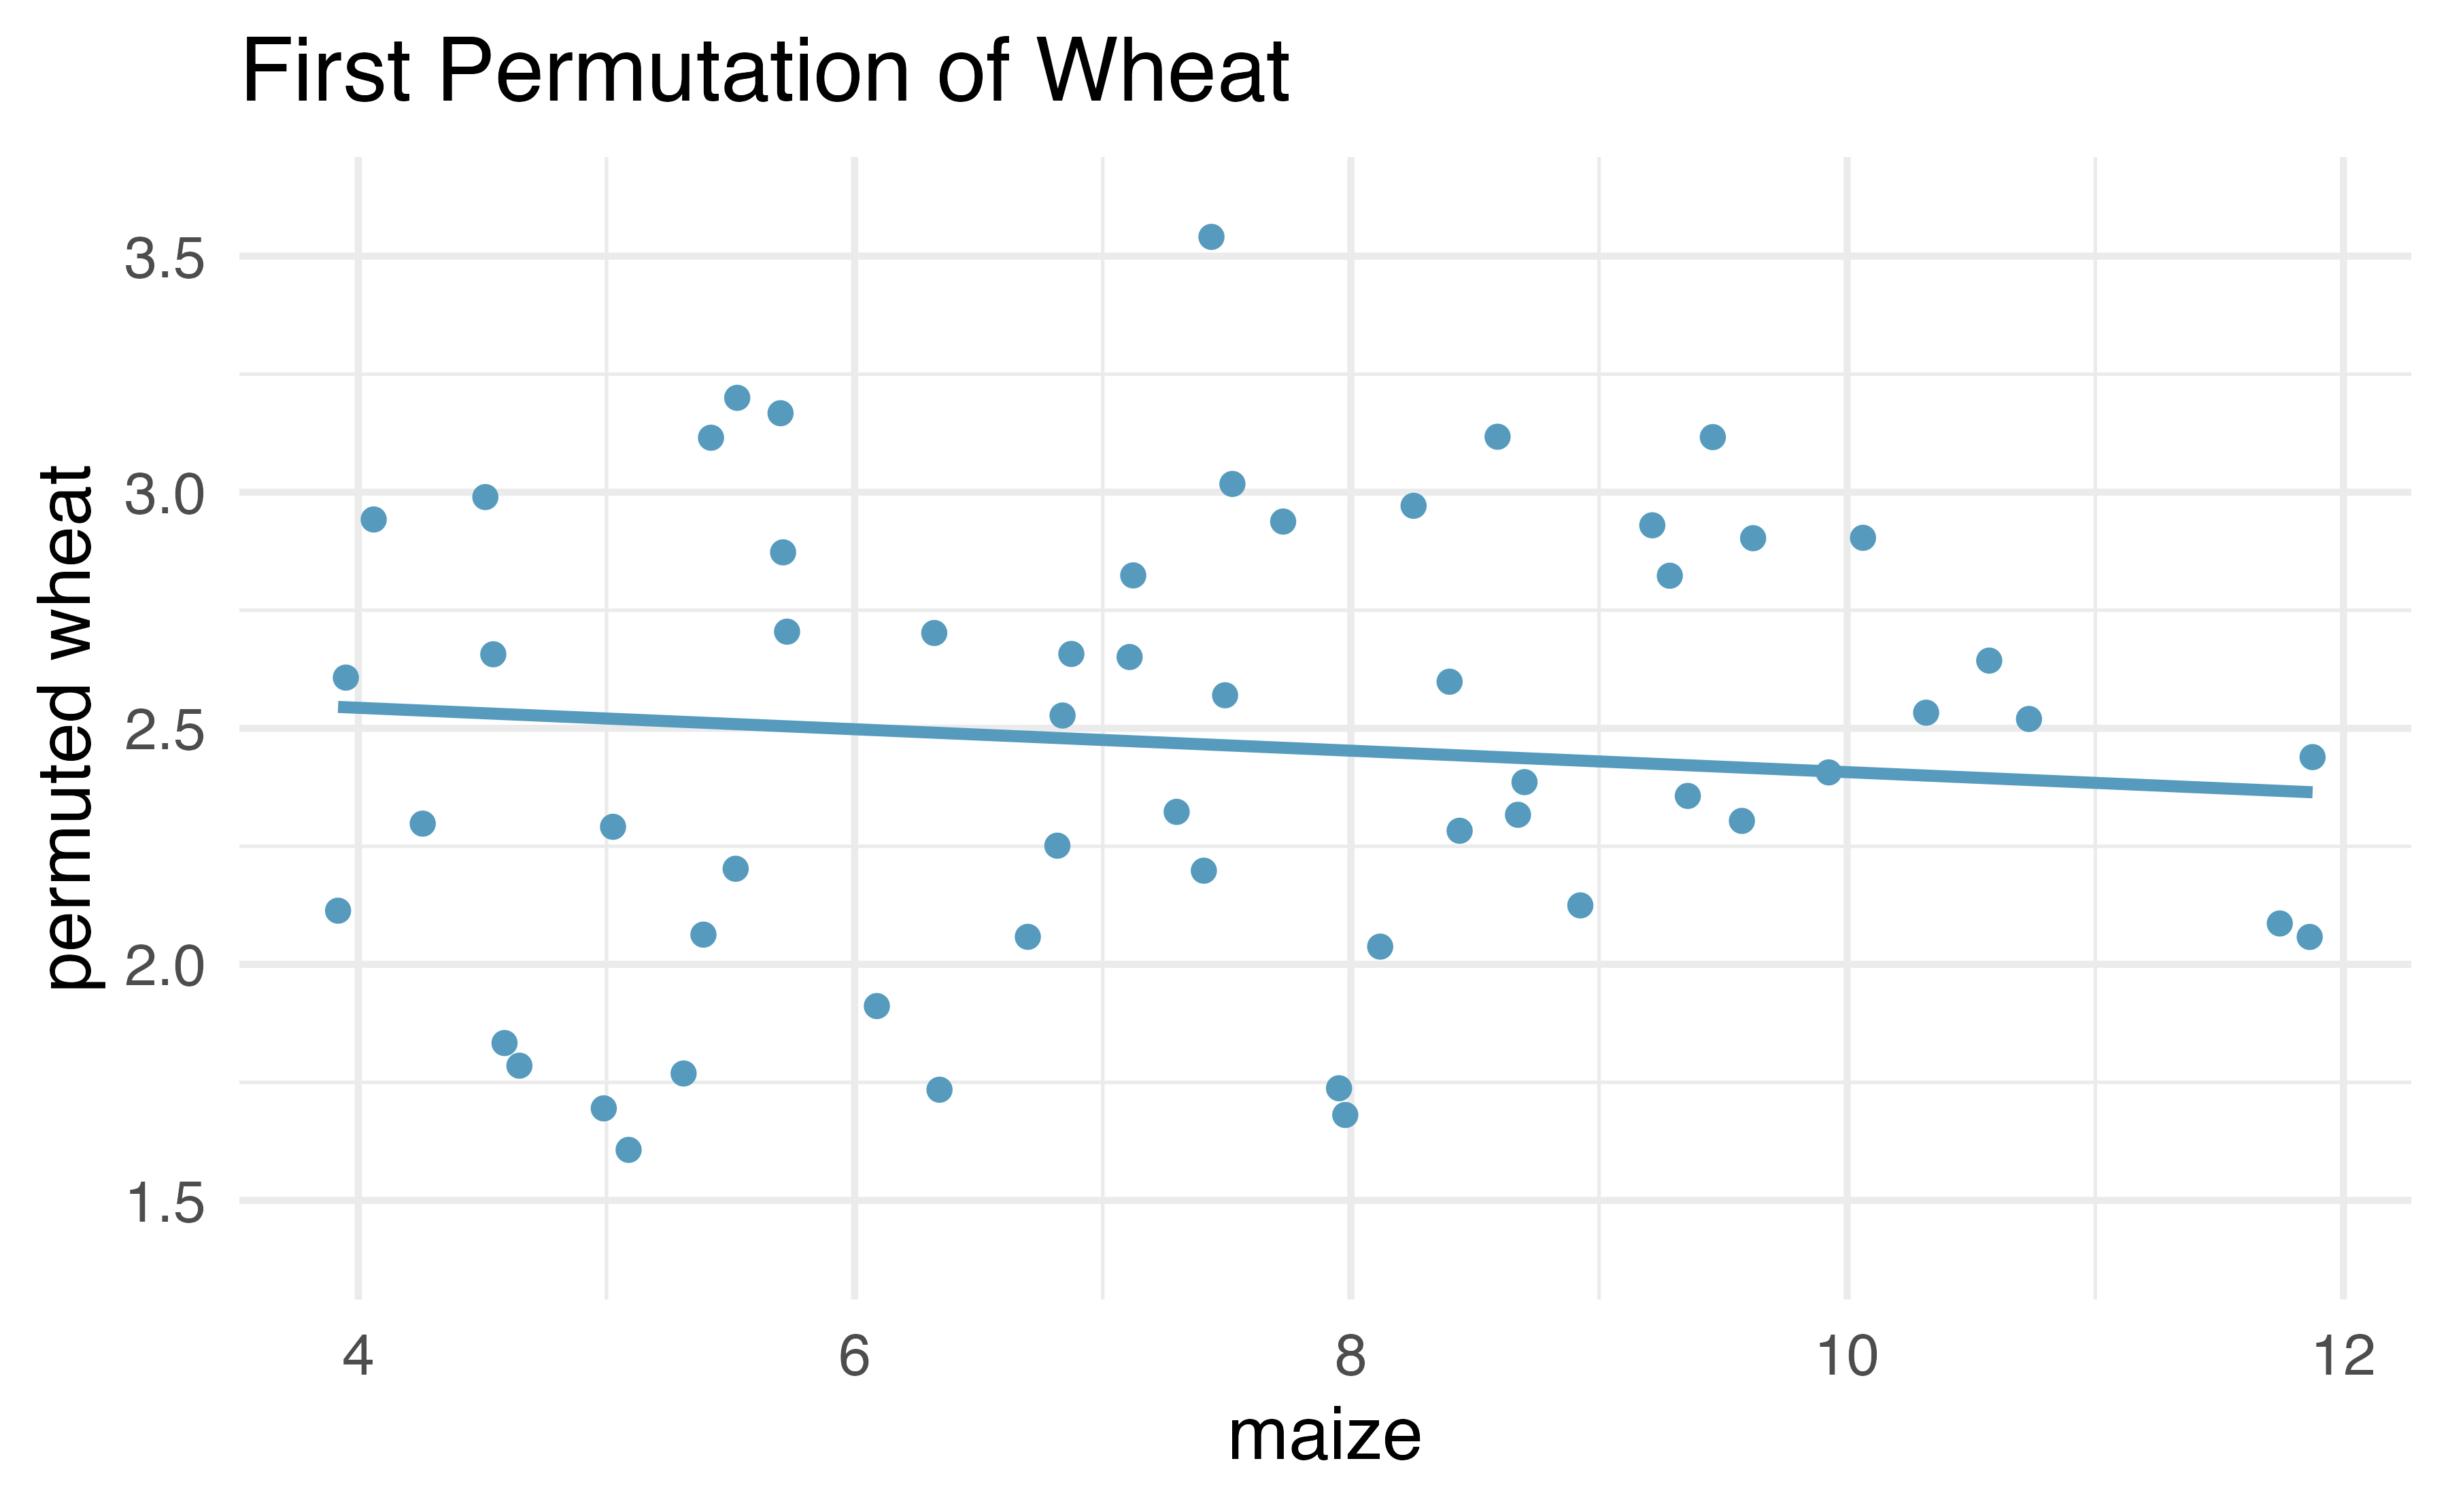 Two different permutations of the wheat variable with slightly different least squares regression lines.